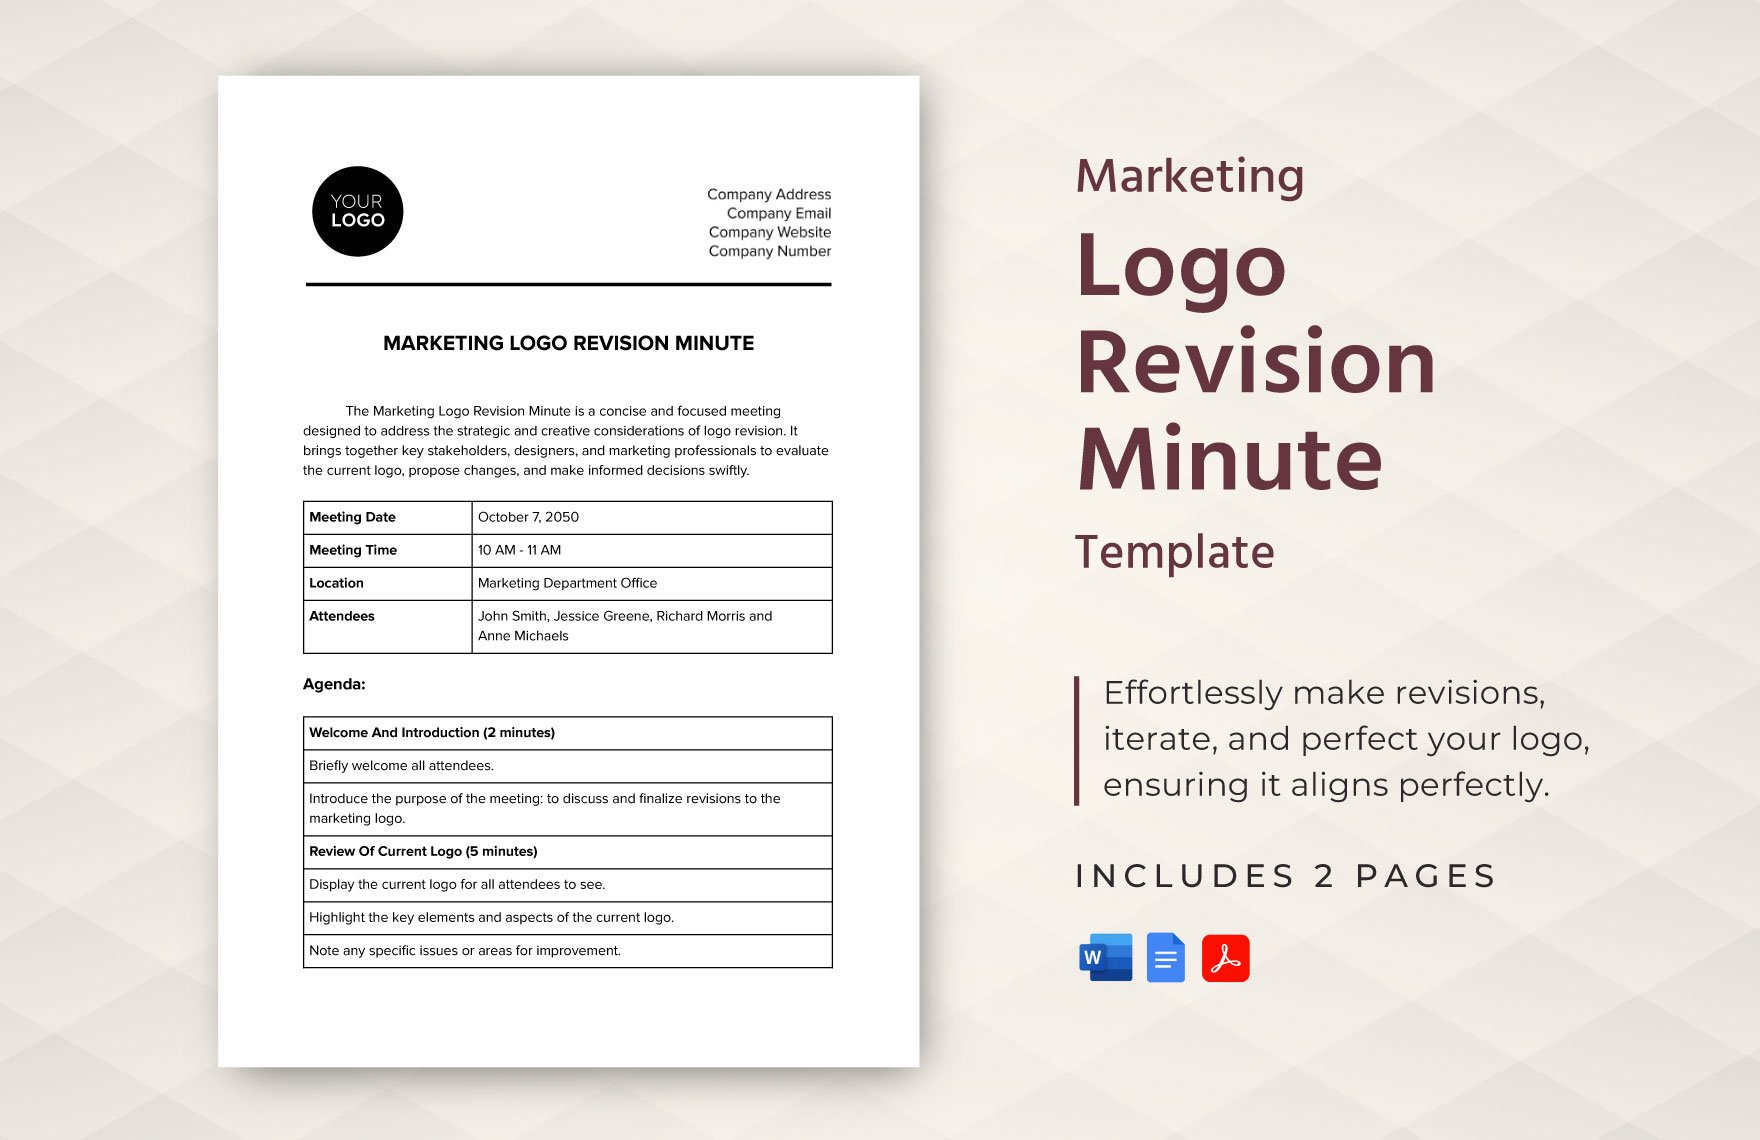 Marketing Logo Revision Minute Template in Word, Google Docs, PDF